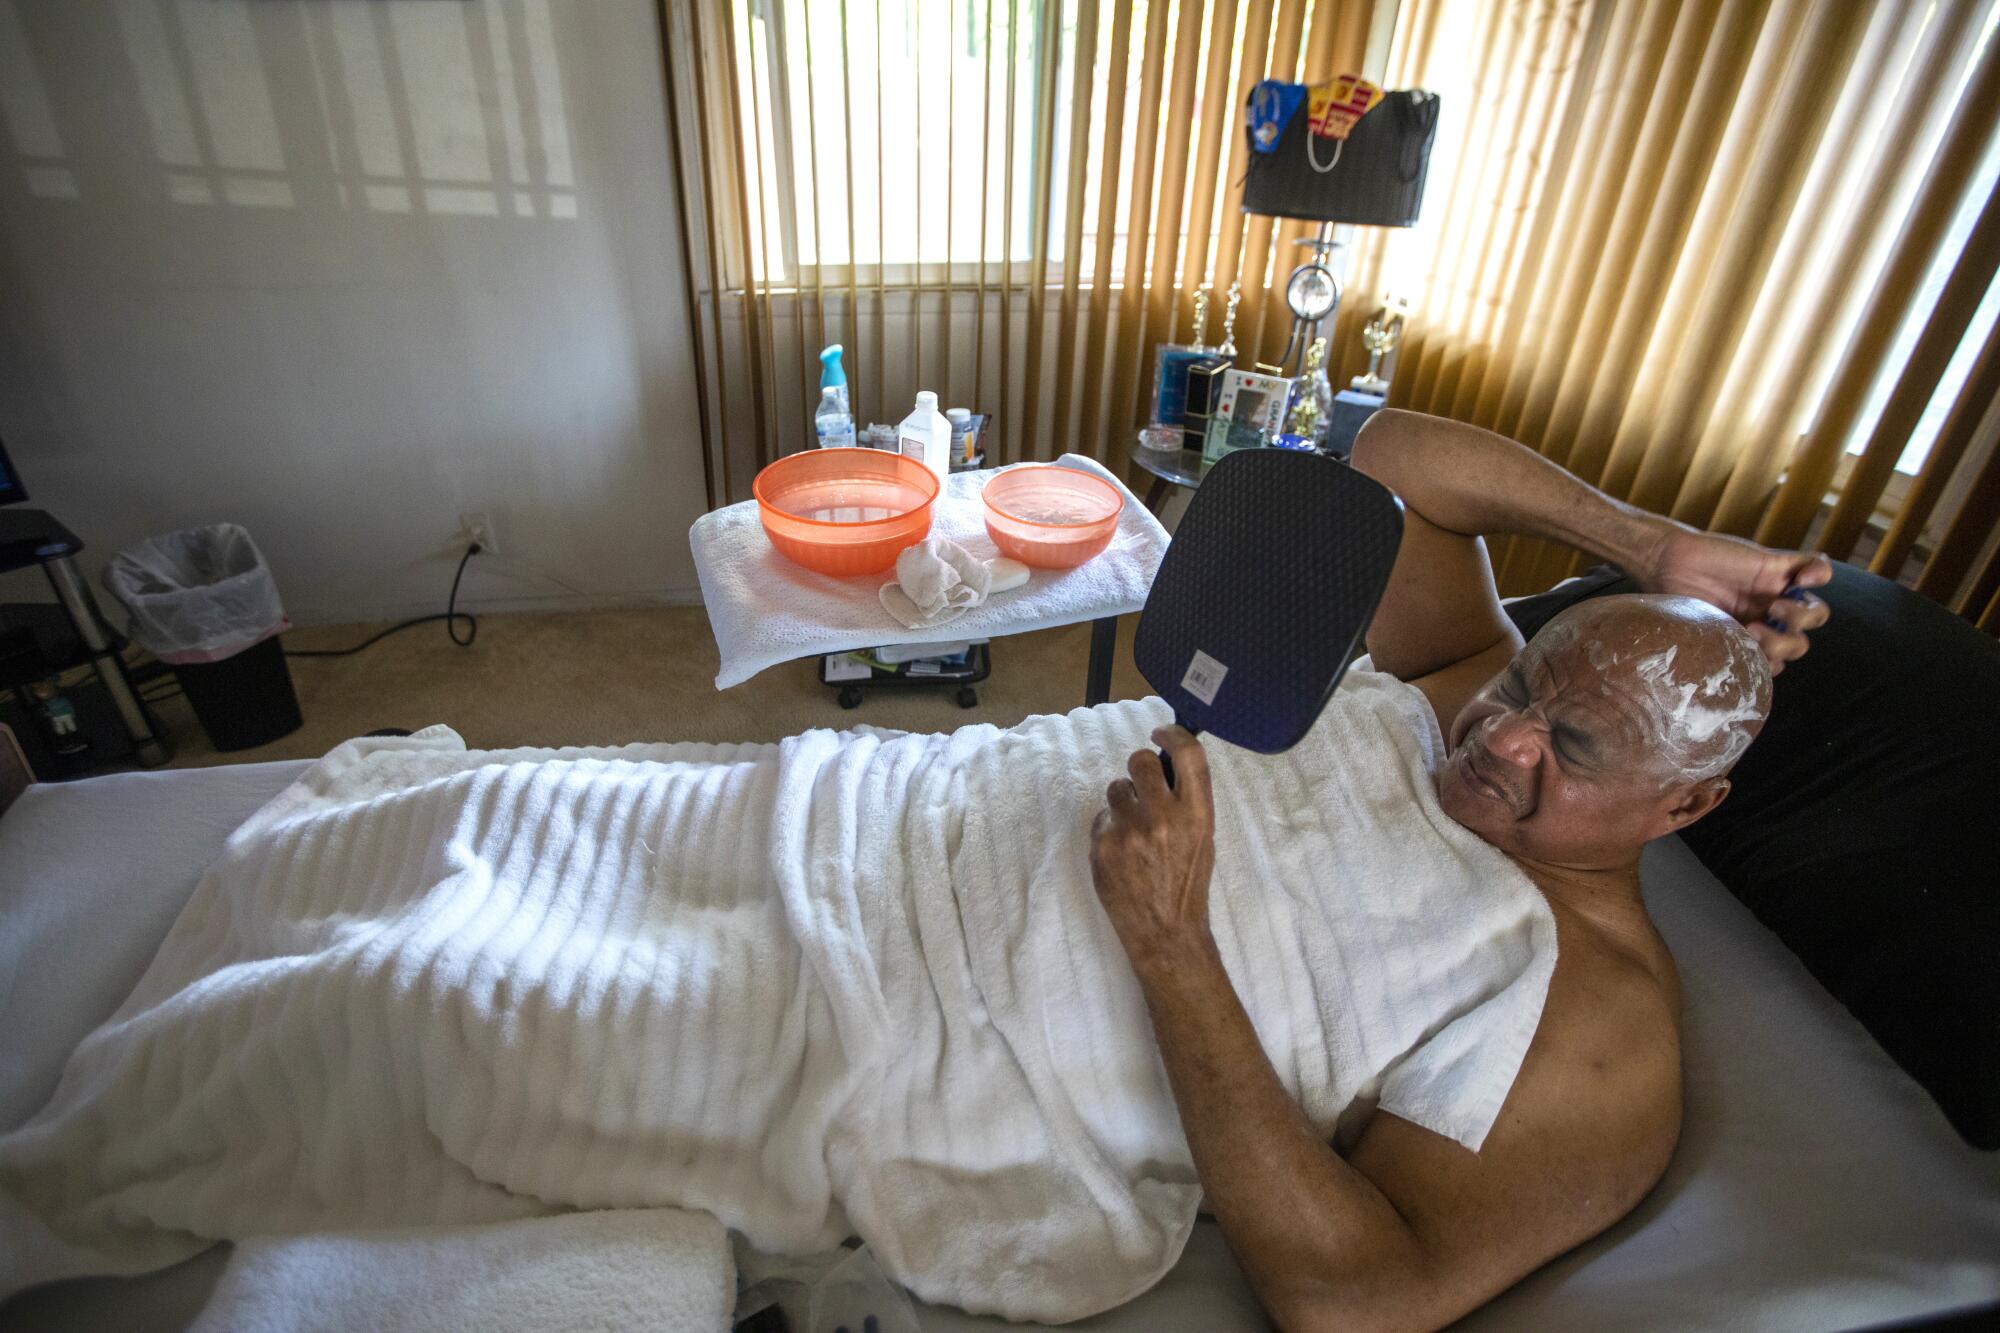 Bill Crawford starts his day, cleaning up and shaving his head in bed in his living room in Watts.